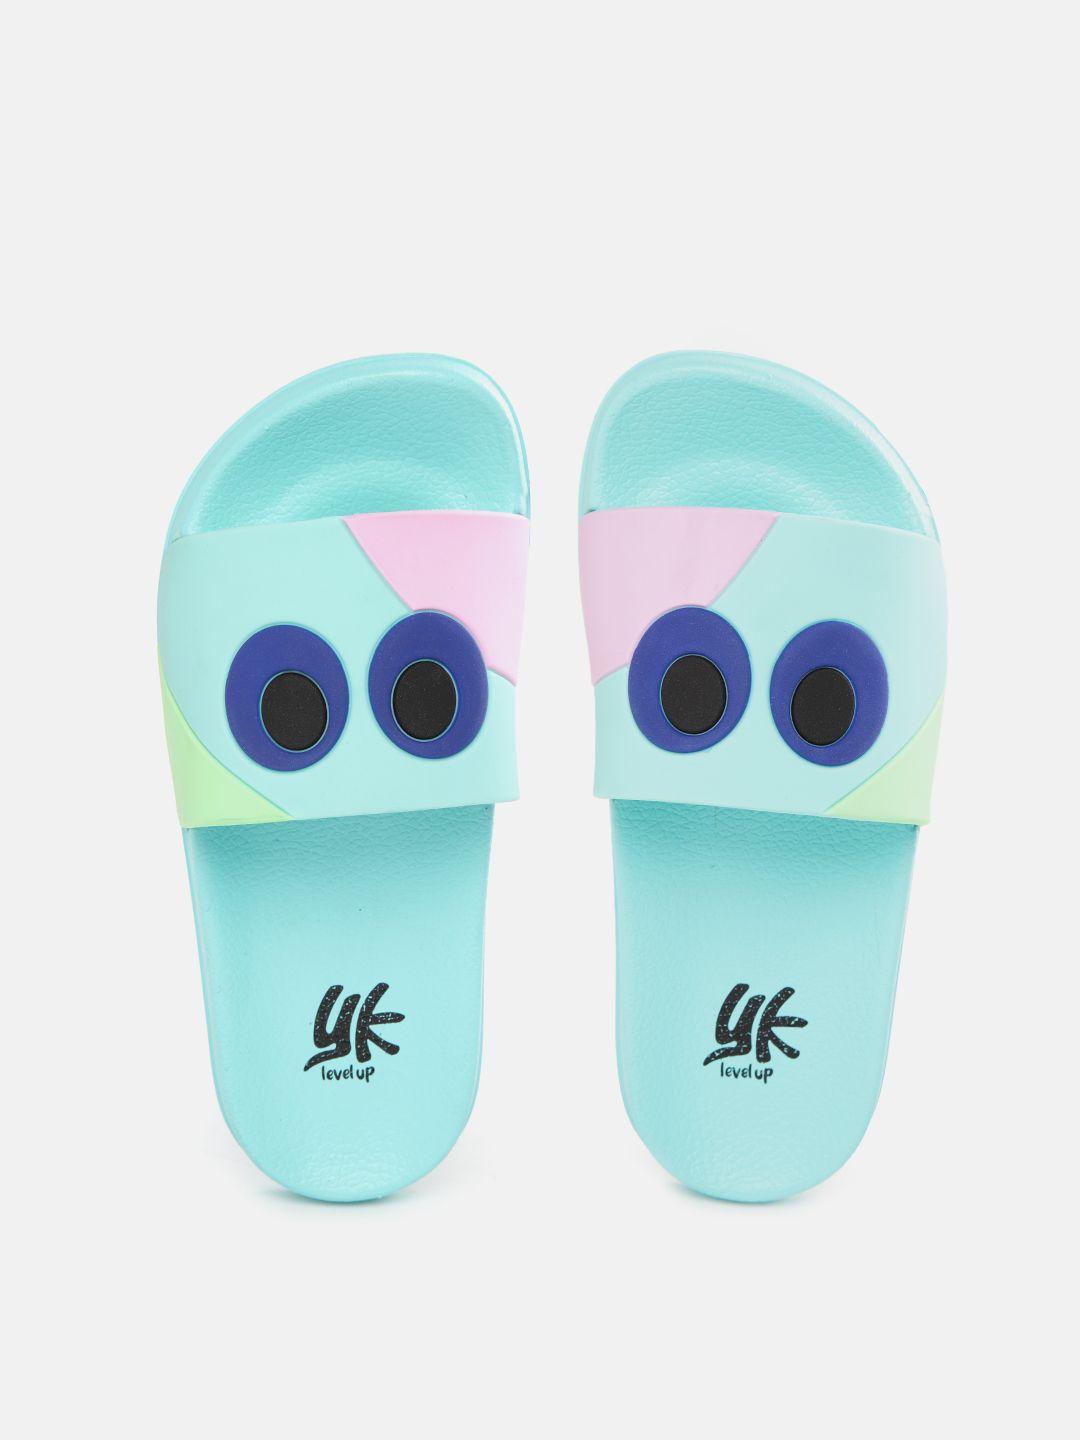 yk boys blue & pink quirky printed sliders